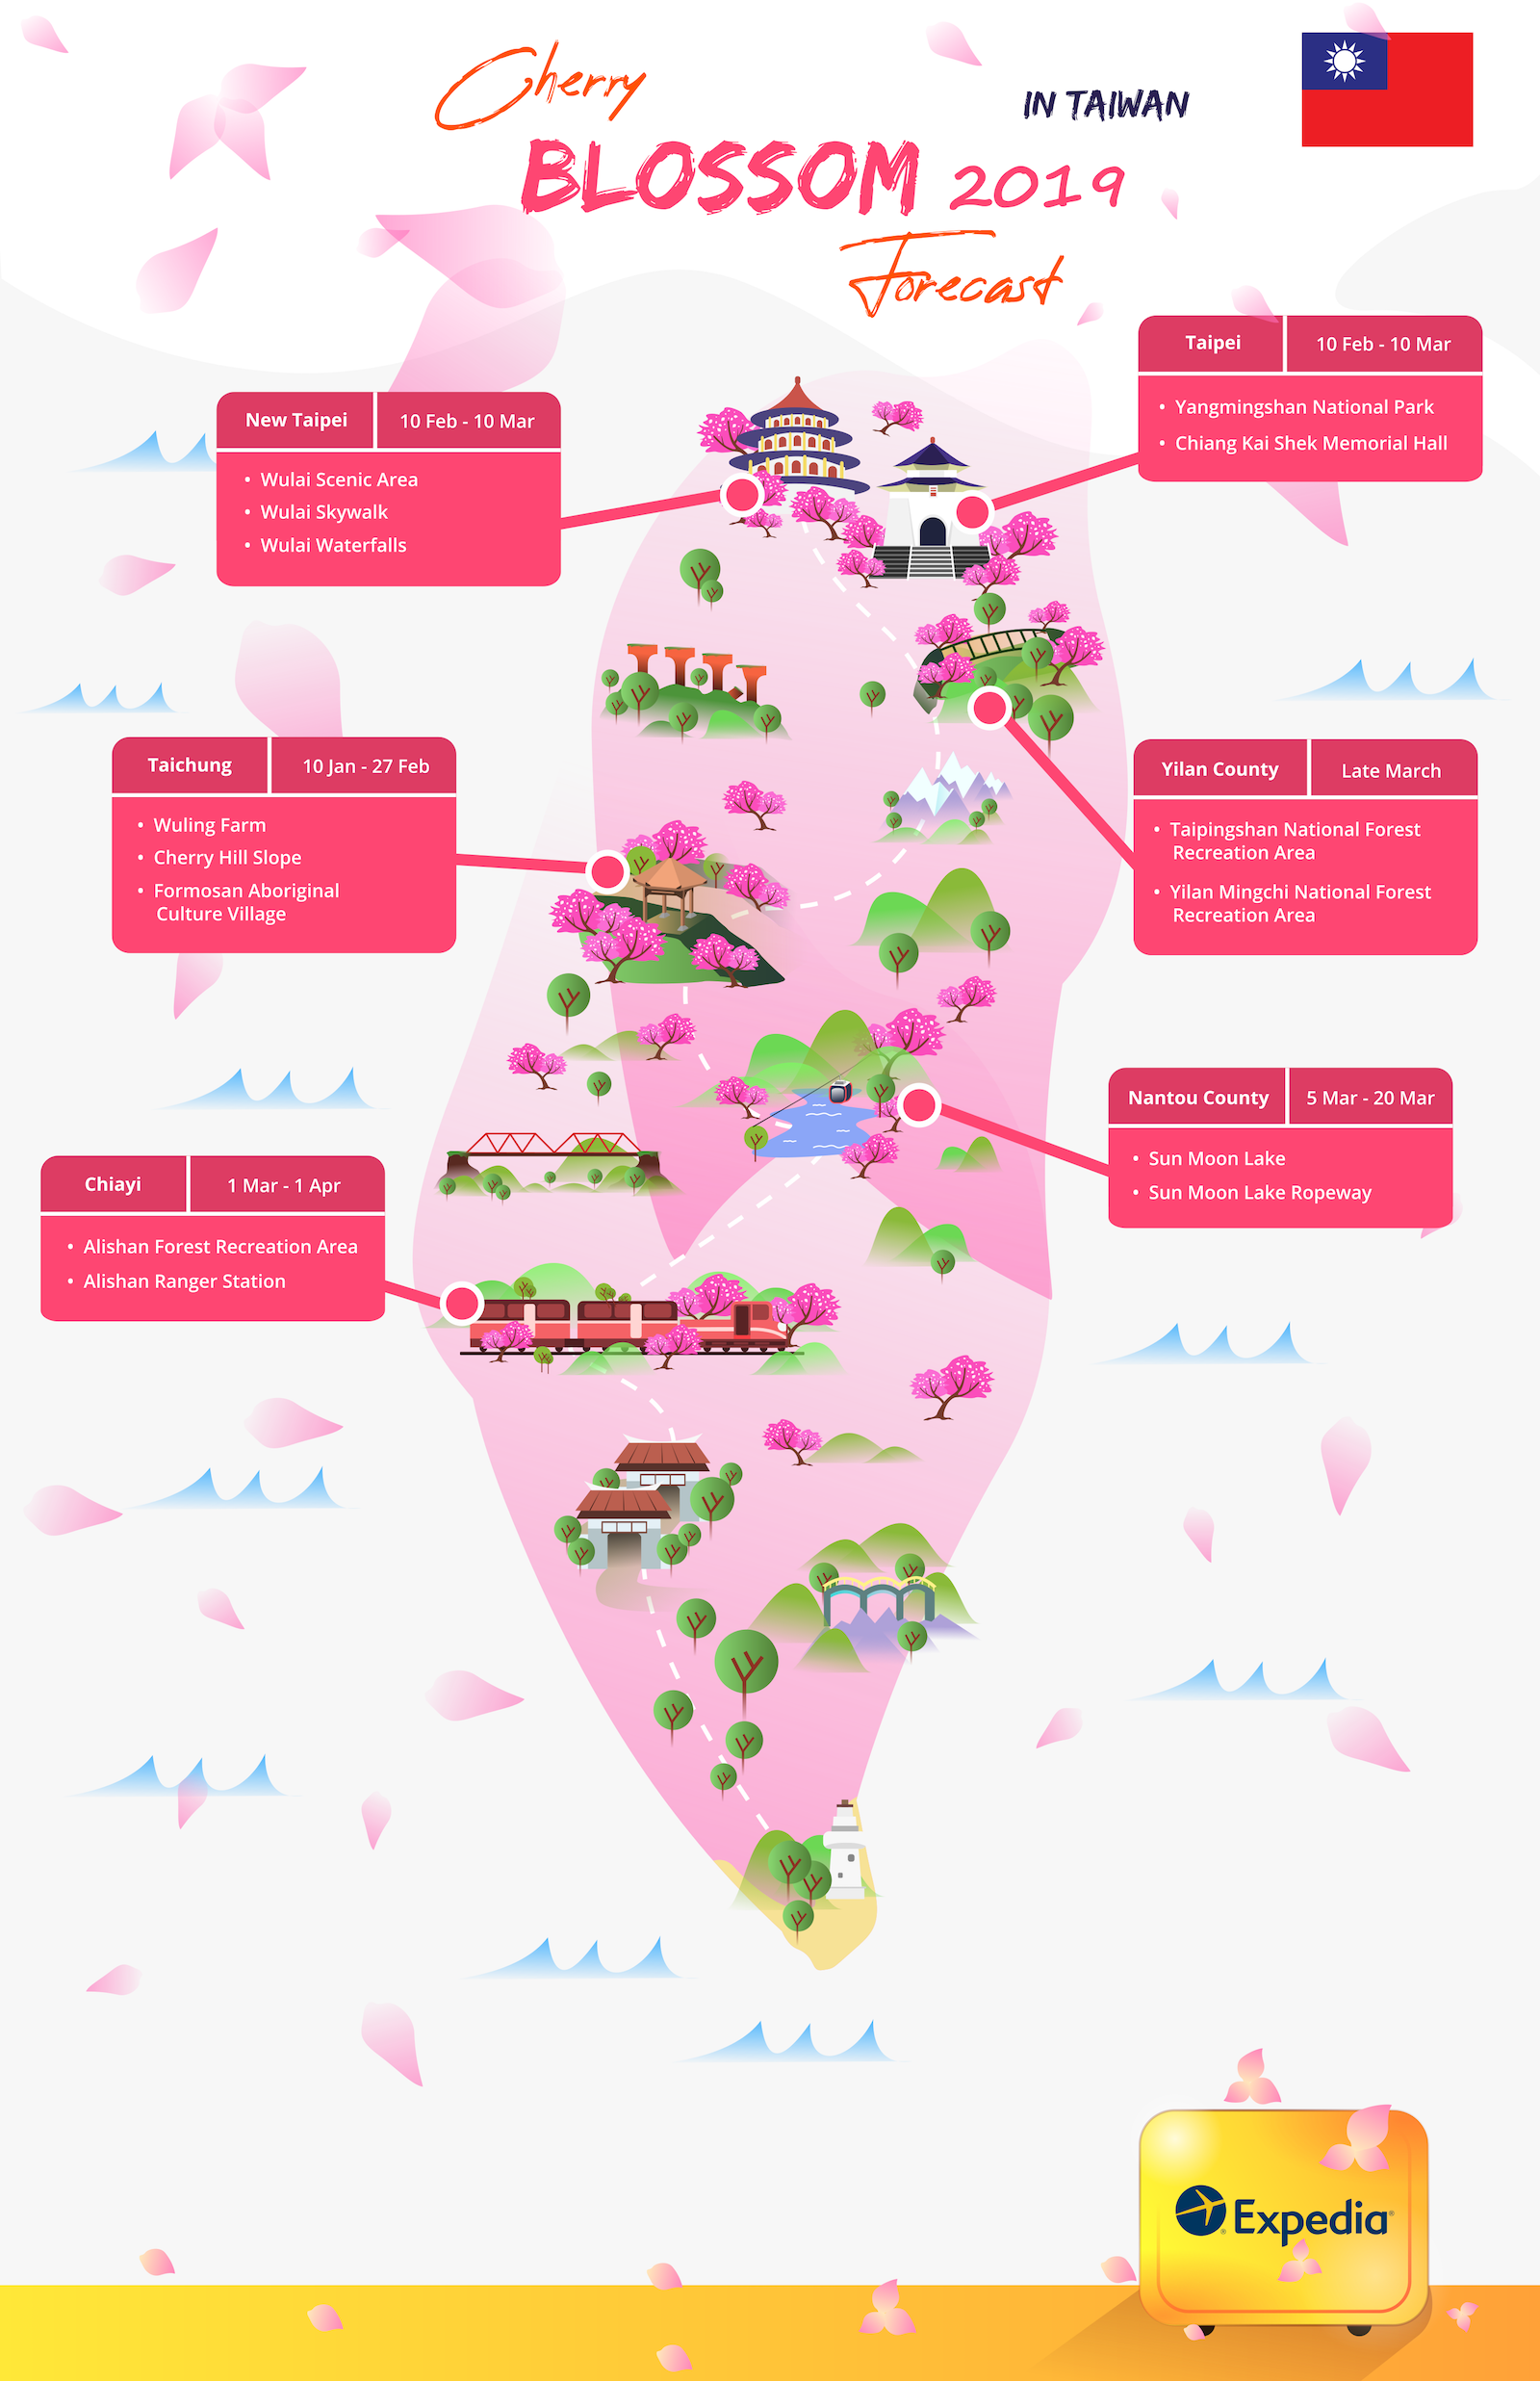 Cherry blossom in Taiwan 2019 forecast